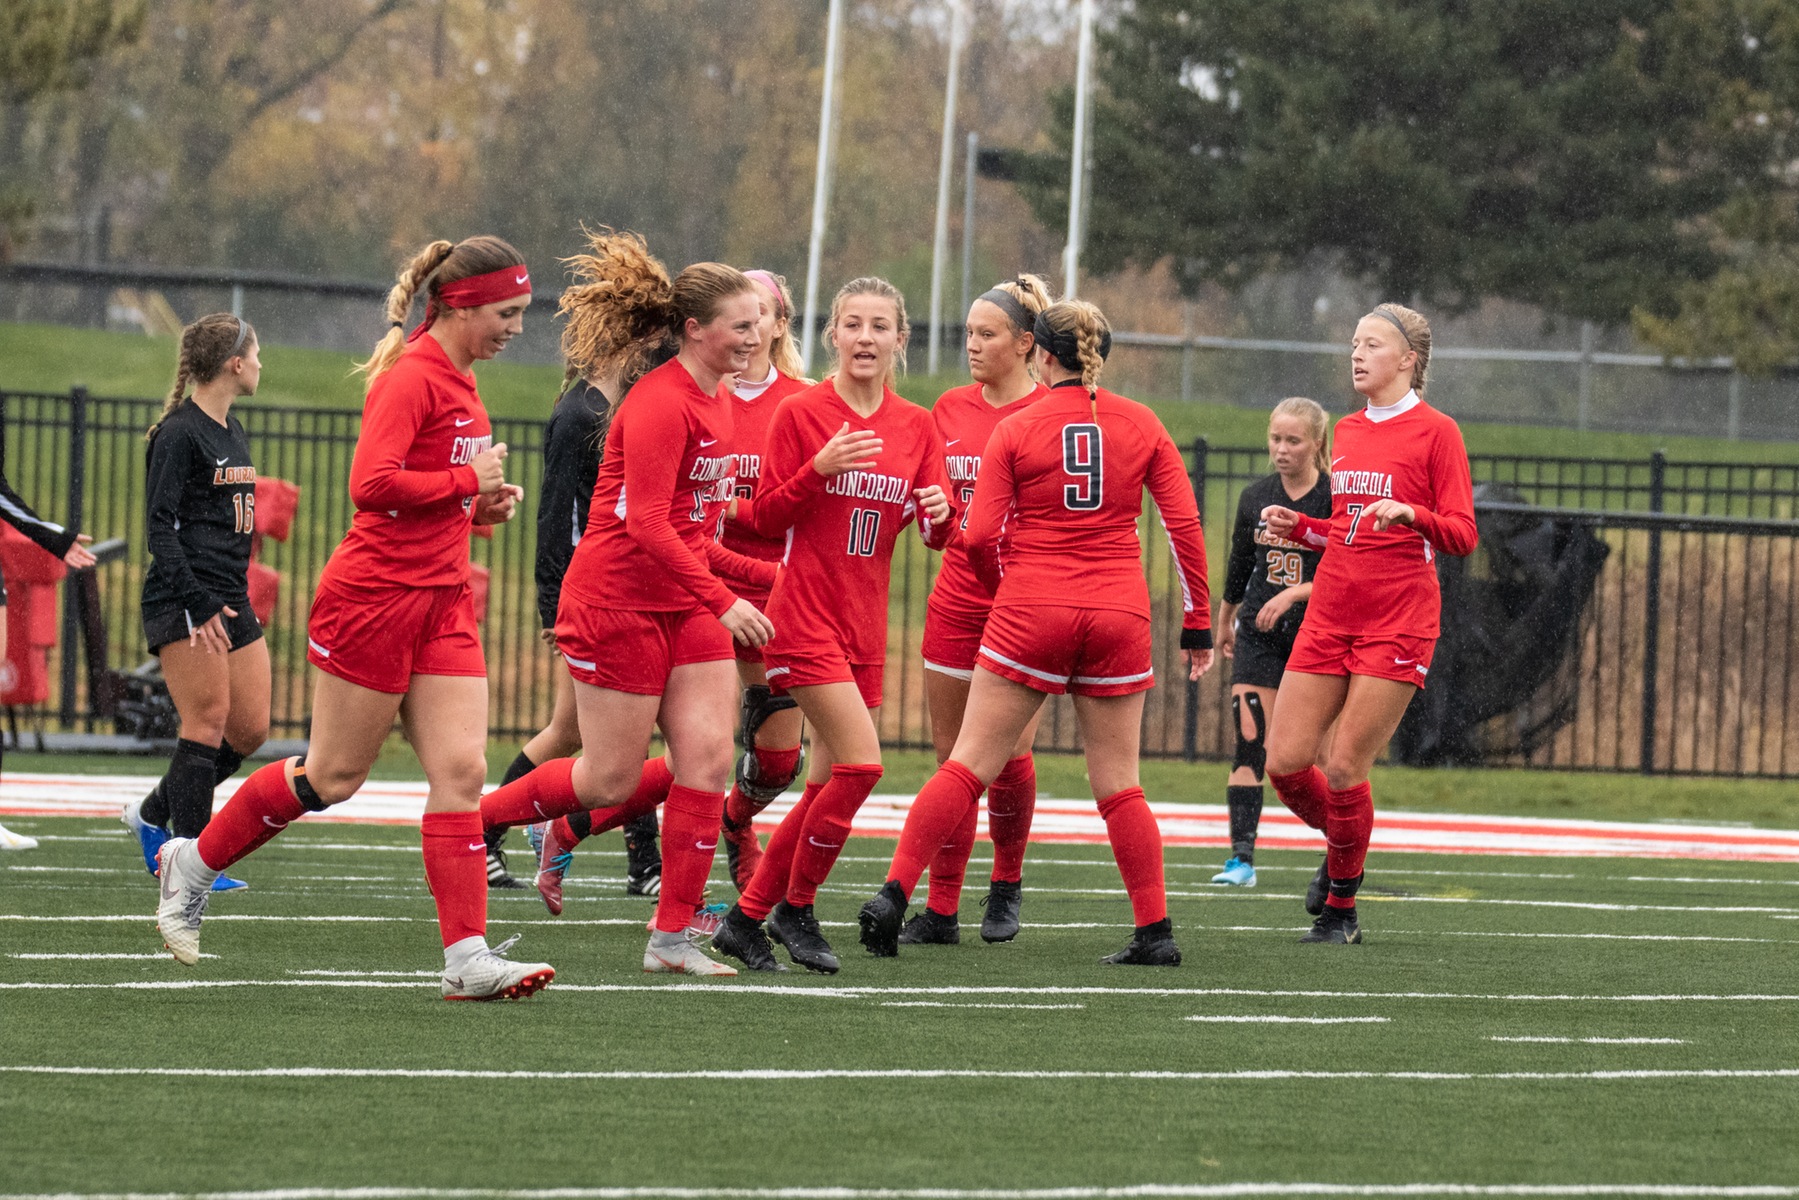 Cardinals downed by Golden Eagles in overtime, 3-2